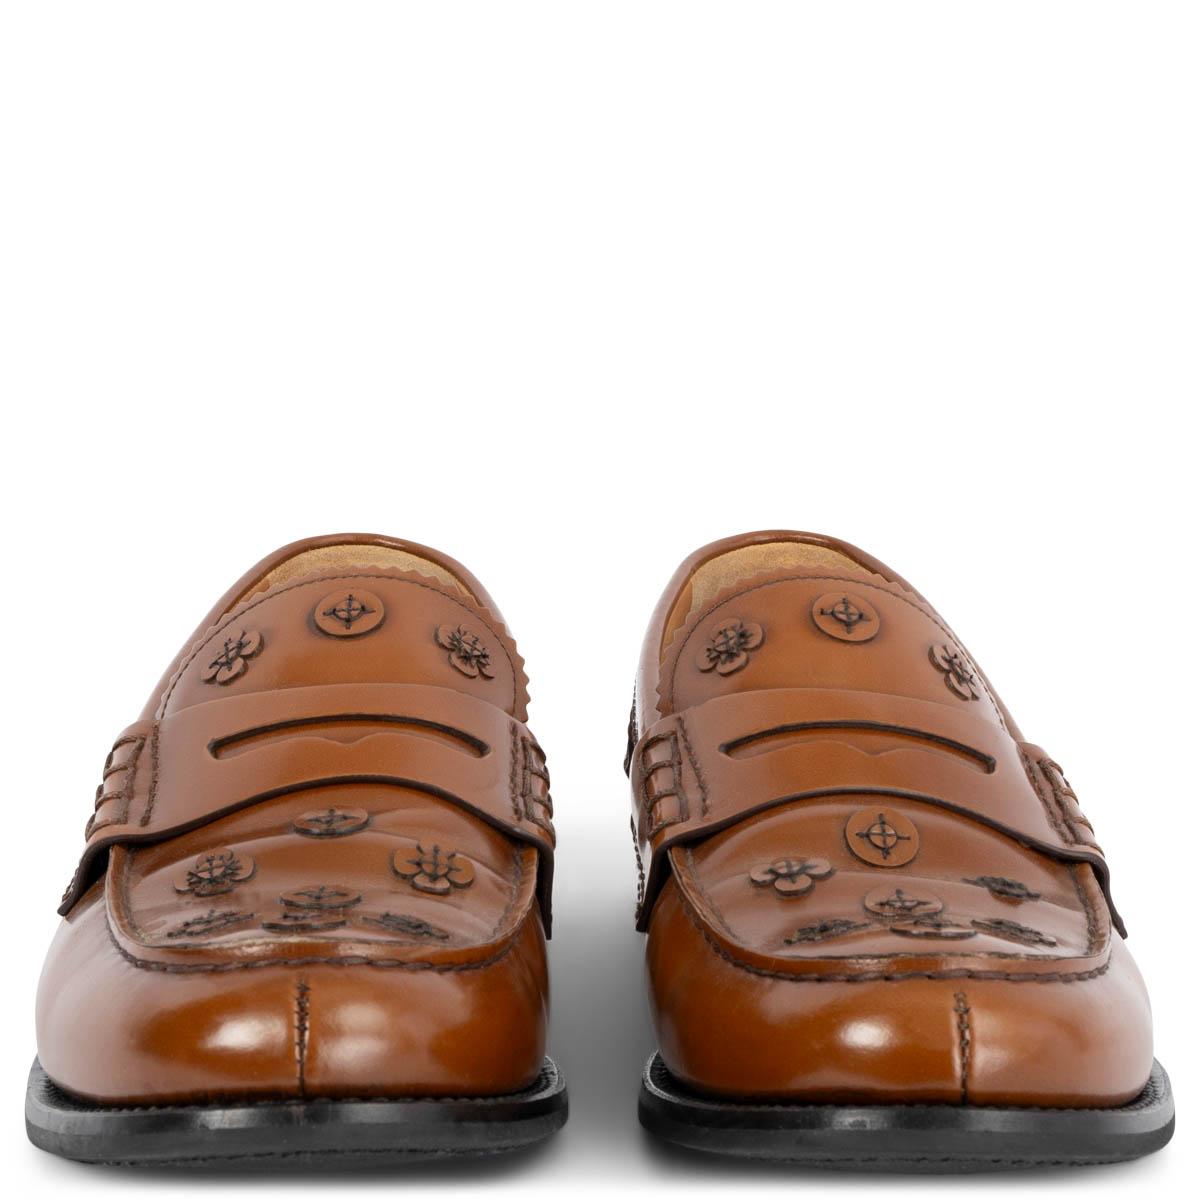 100% authentic Church's classic penny loafers in cognac glossy leather embellished with tonal leather flowers. Have been worn and are in excellent condition. 

Measurements
Imprinted Size	40
Shoe Size	40
Inside Sole	27cm (10.5in)
Width	8cm